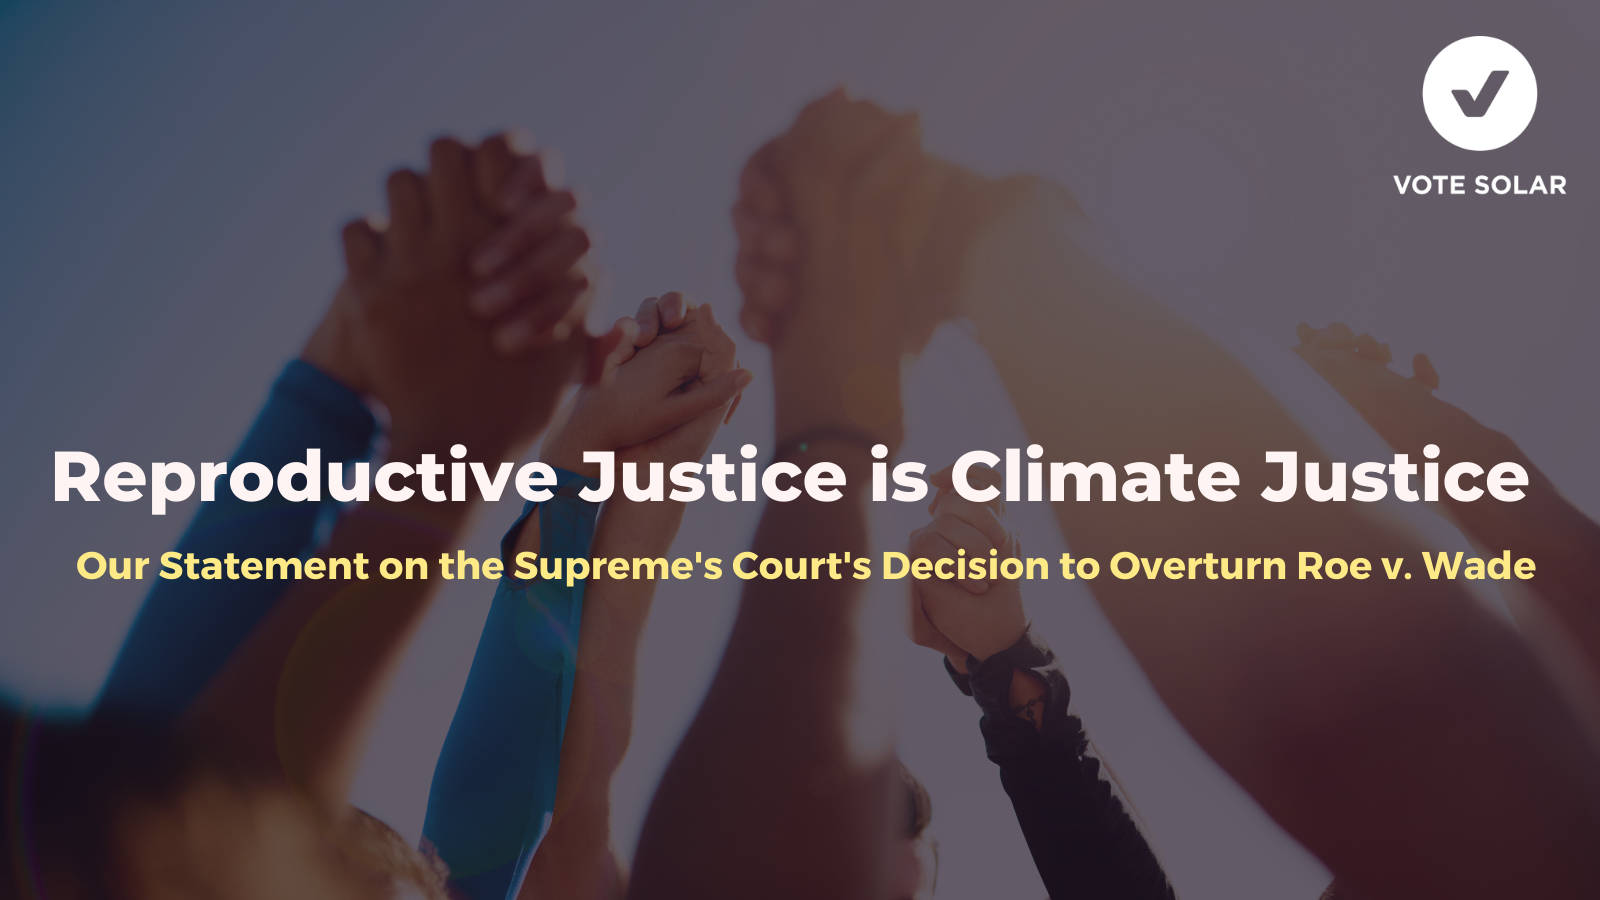 Vote Solar’s Statement on the overturning of Roe v. Wade